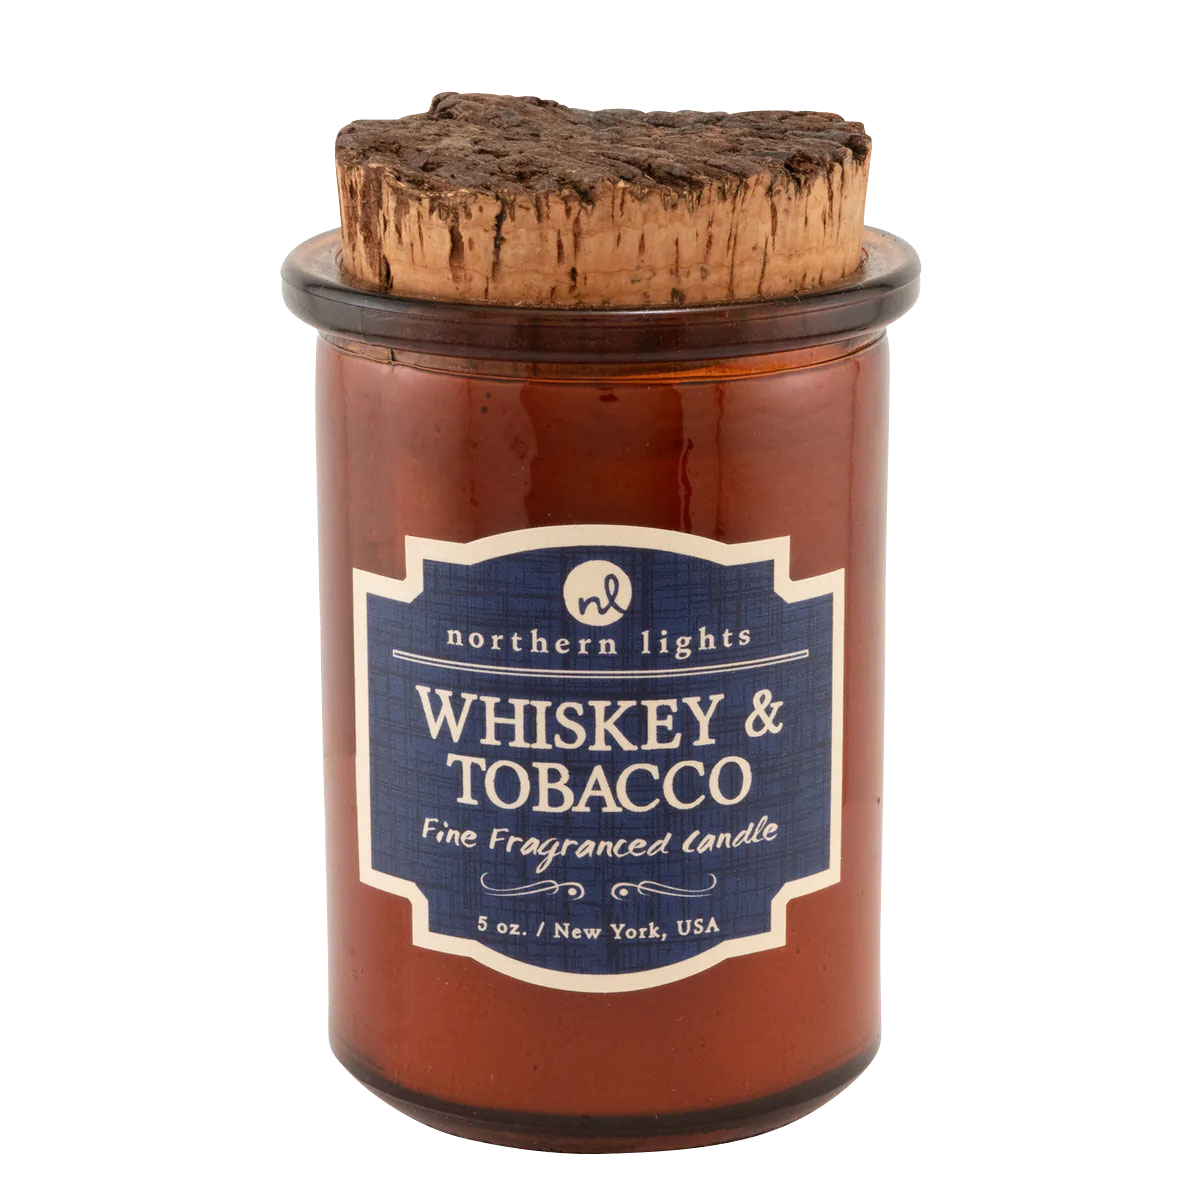 Northern Lights Whiskey & Tobacco Candle